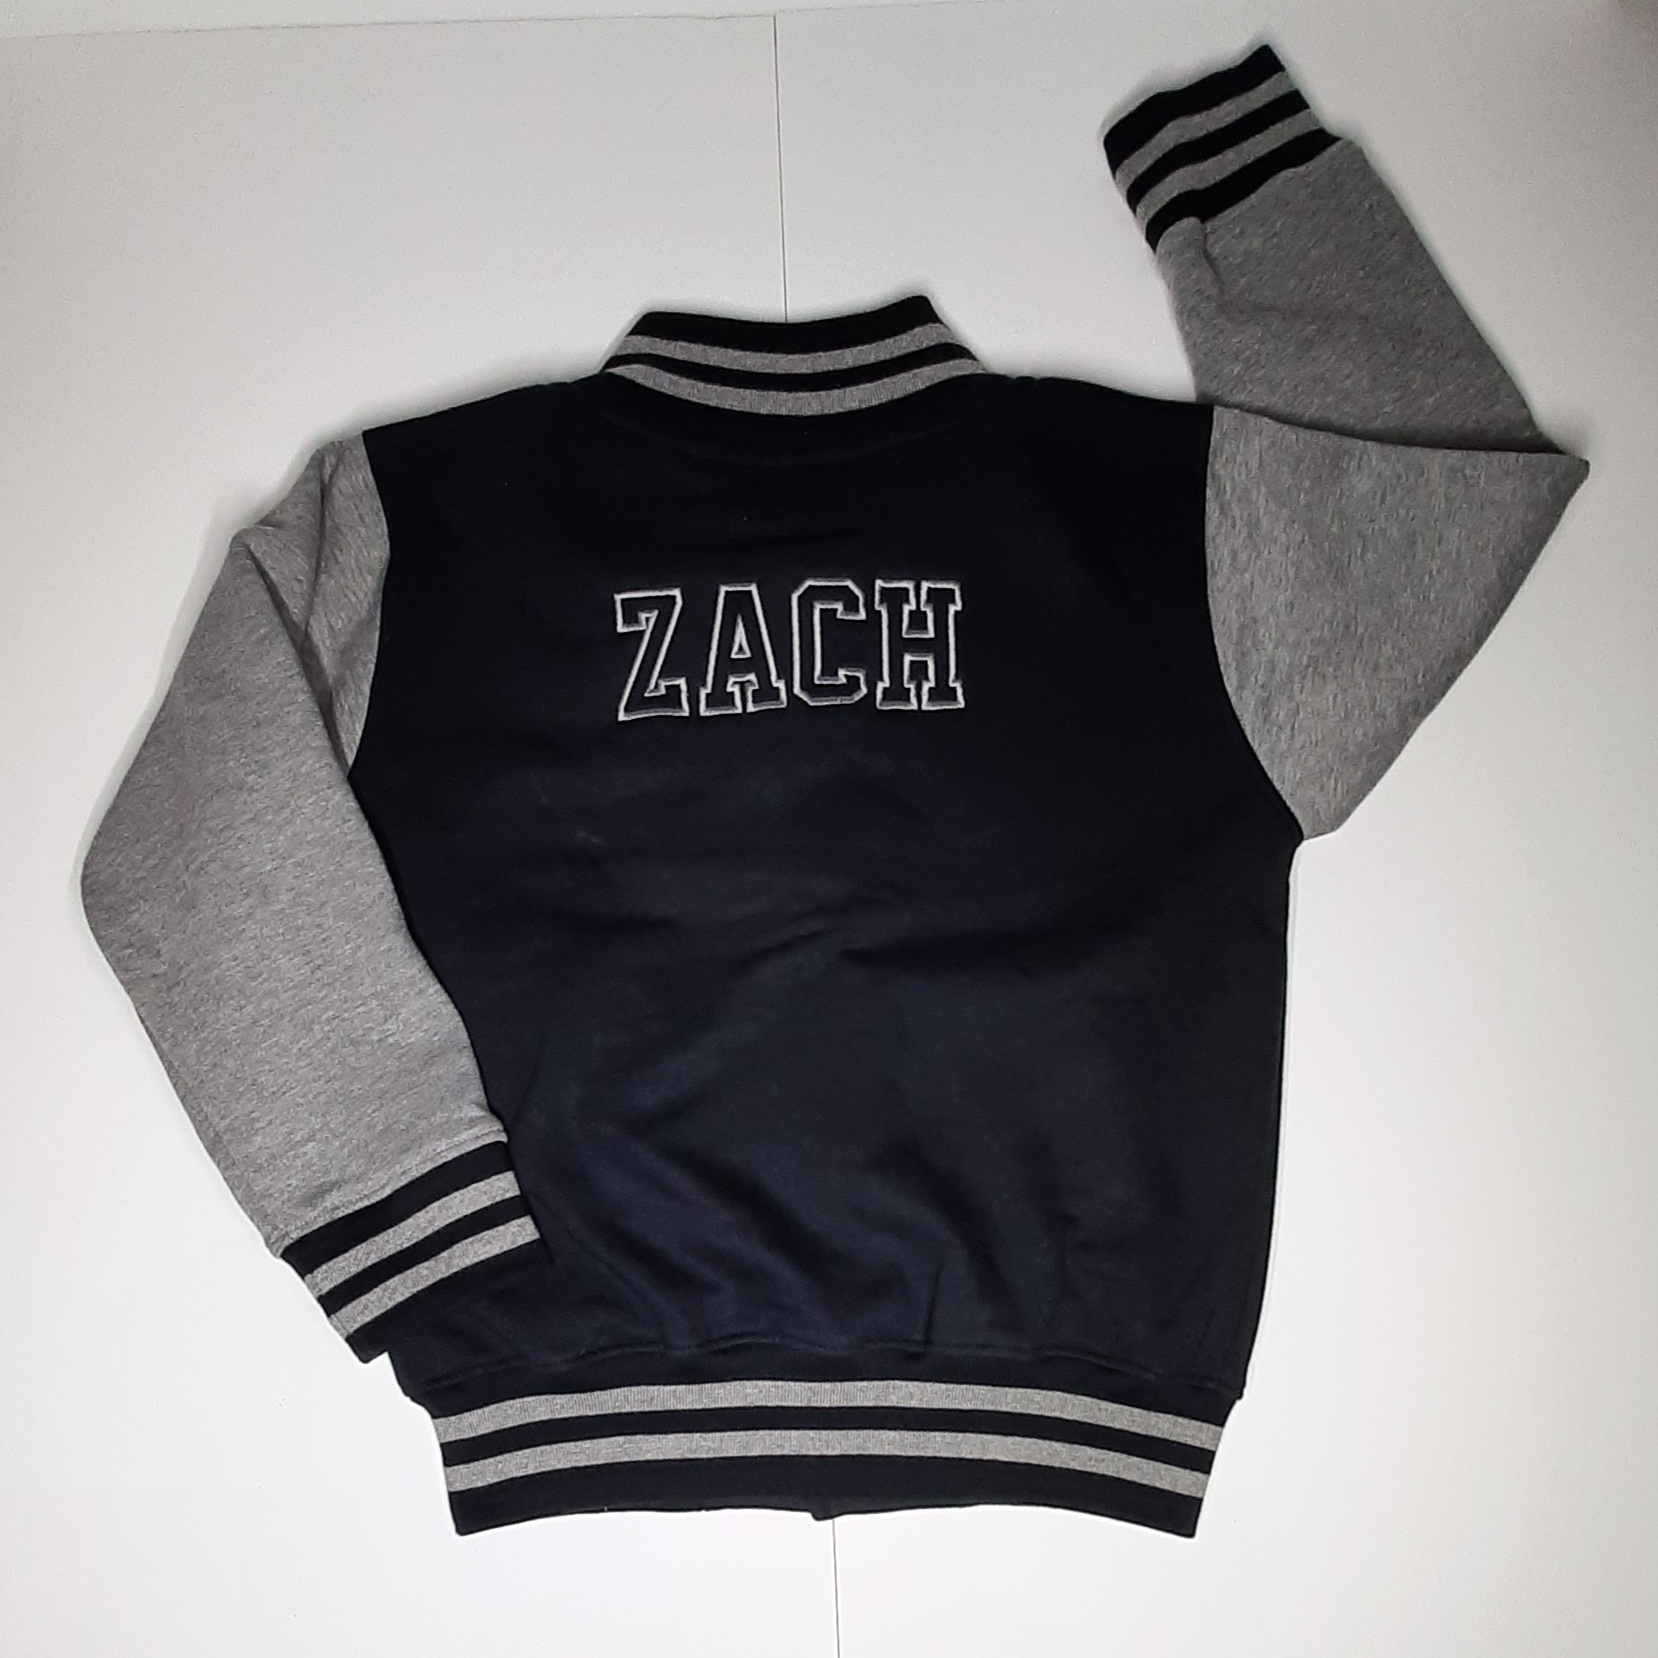 Children's varsity jacket on model in black and grey with embroidered name laid out